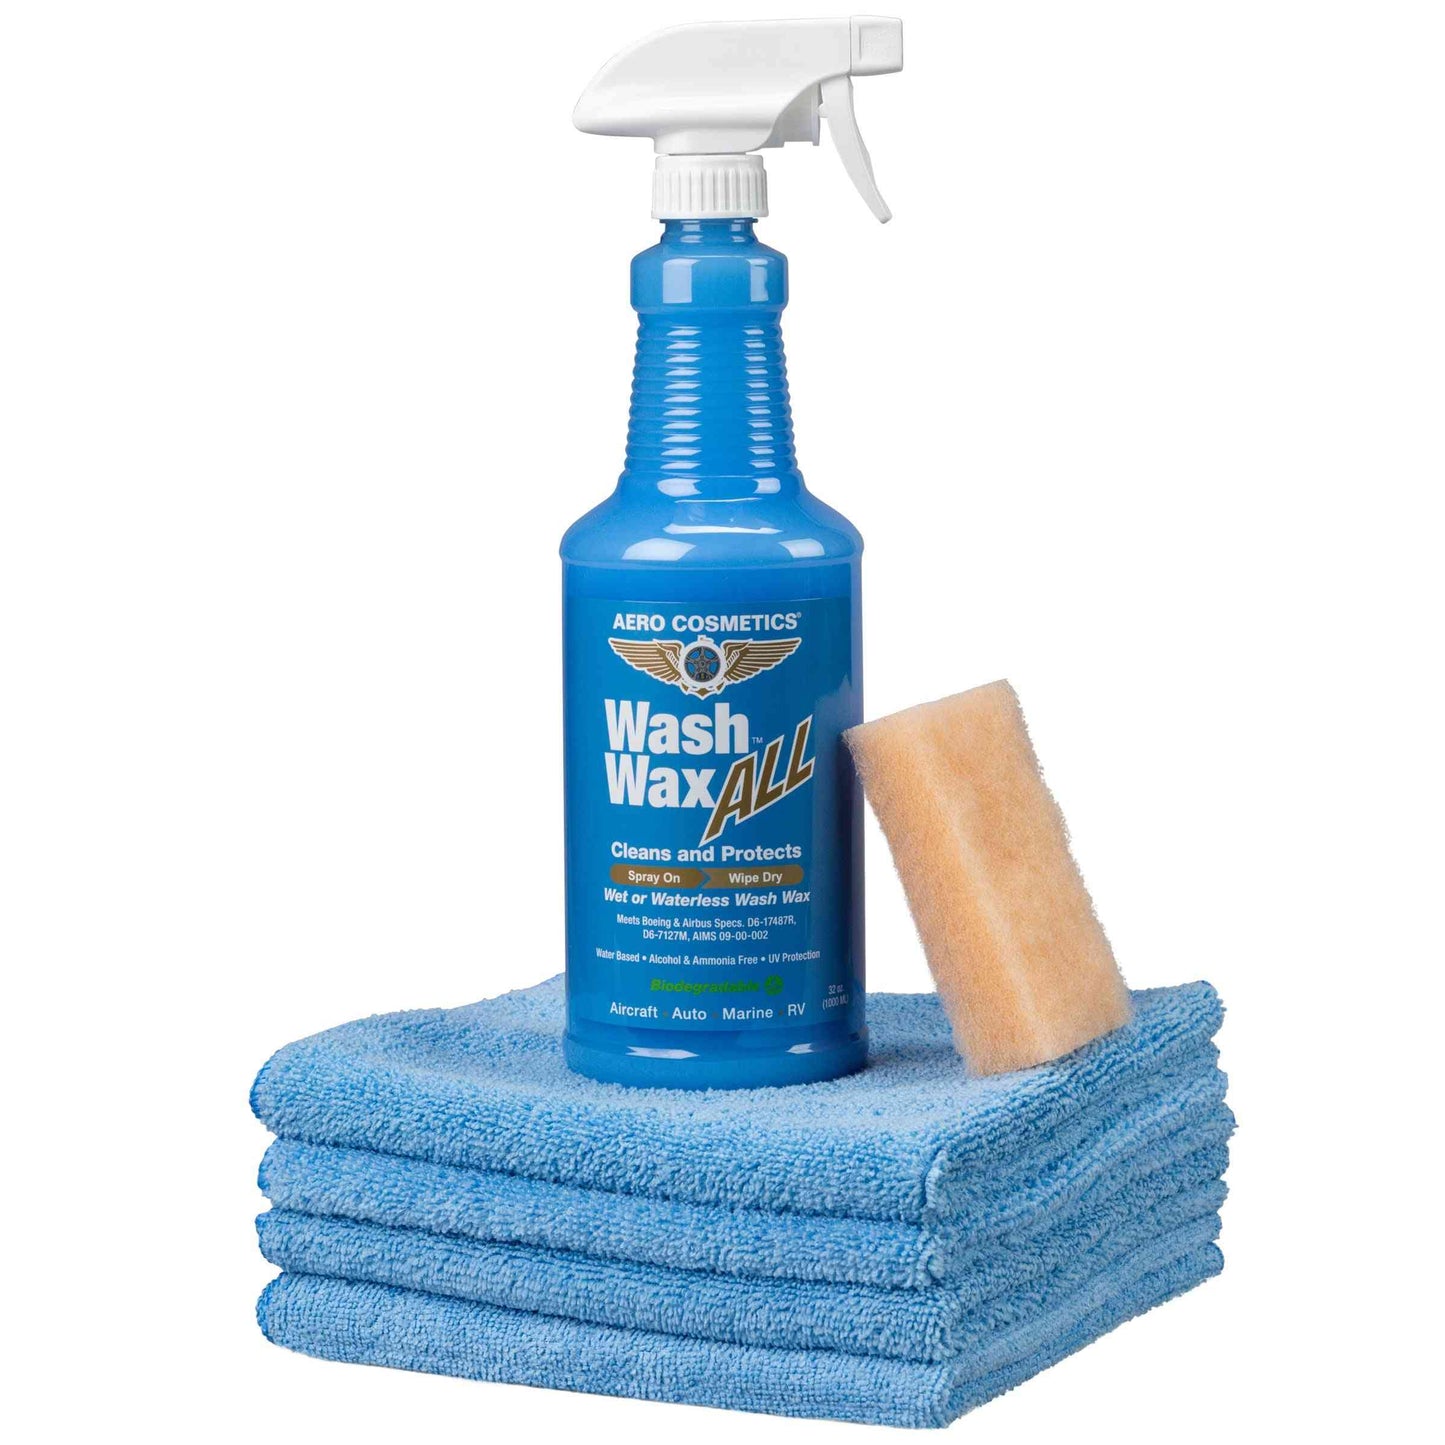 Wash Wax ALL™ 32 Fl. oz Kit - Waterless Wash Cleaner and Protectant